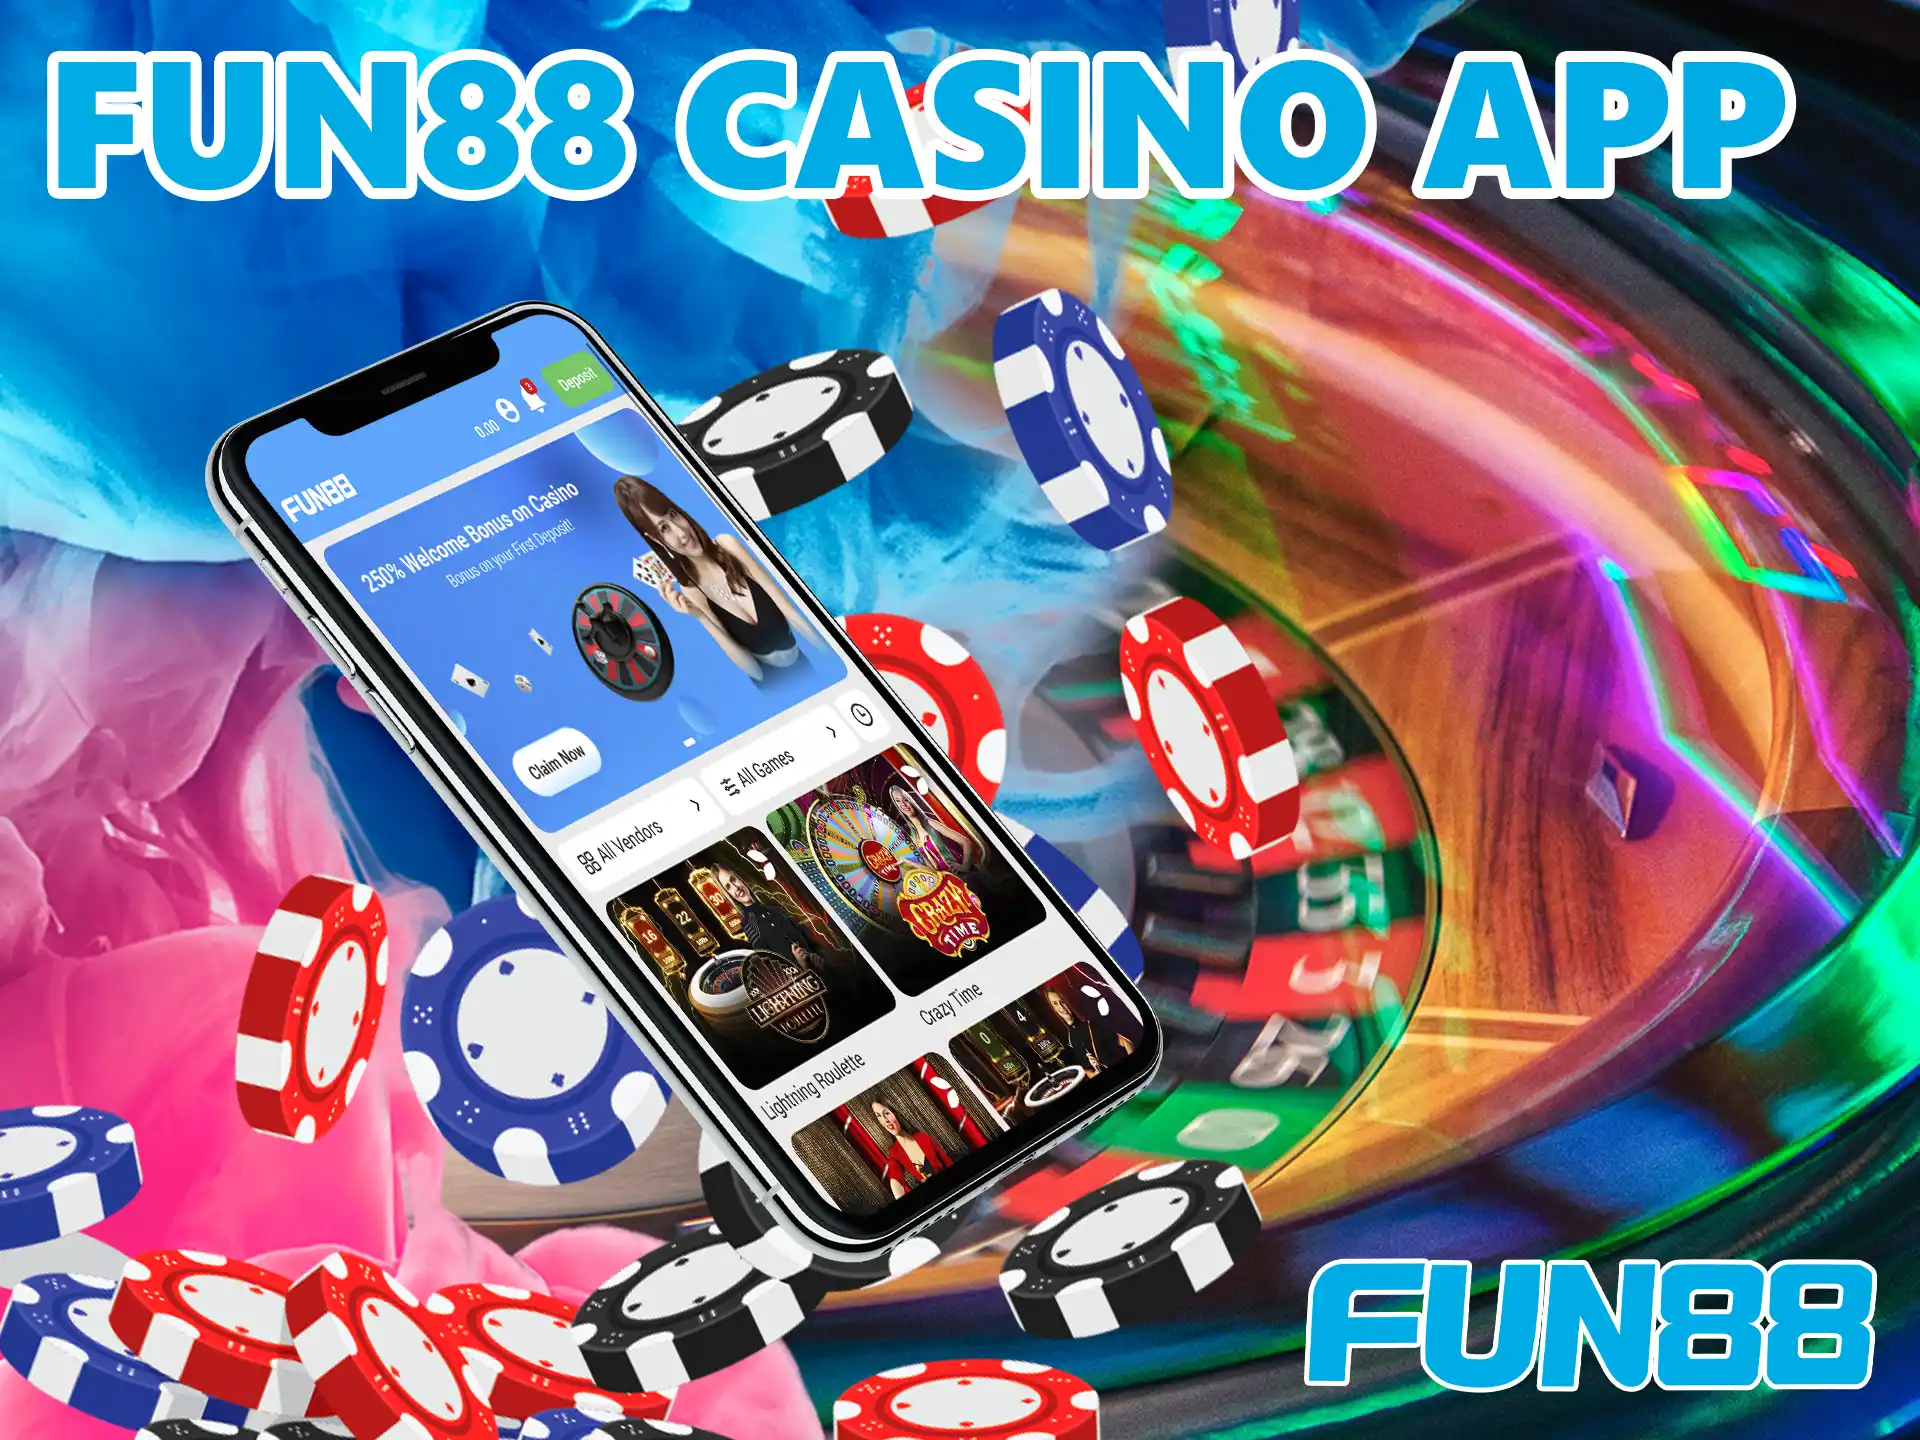 If users are tired of betting they can diversify their entertainment and play numerous gambling games with the help of the Fun88 app.